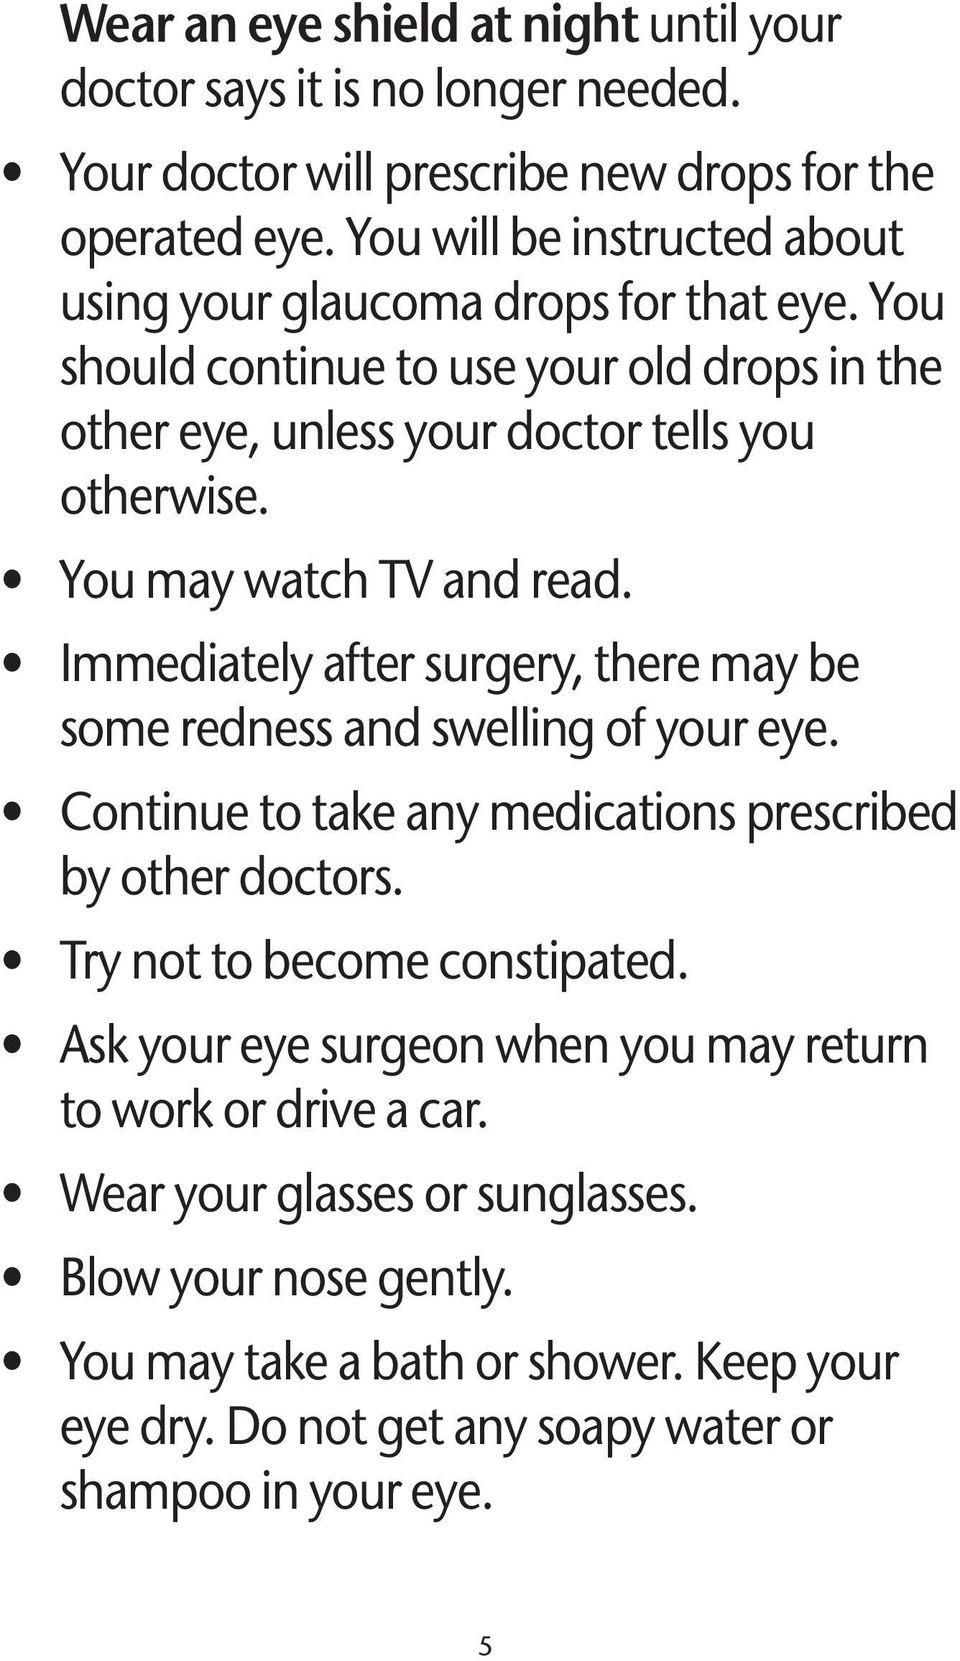 You may watch TV and read. Immediately after surgery, there may be some redness and swelling of your eye. Continue to take any medications prescribed by other doctors.